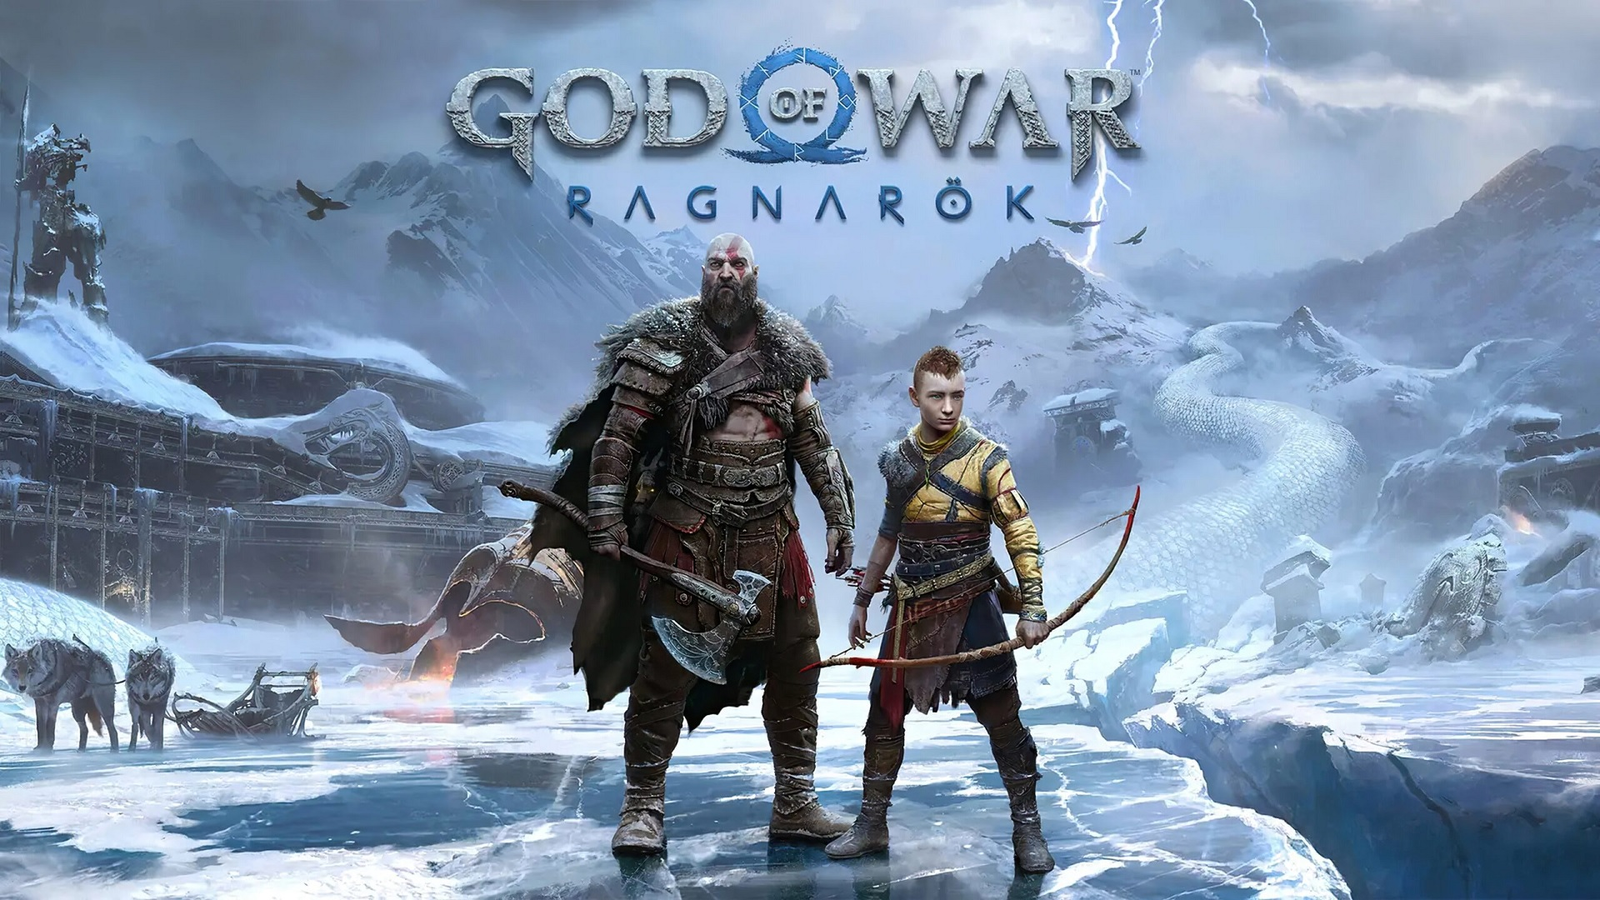 God of War: Ragnarok is launching on November 9th - The Verge